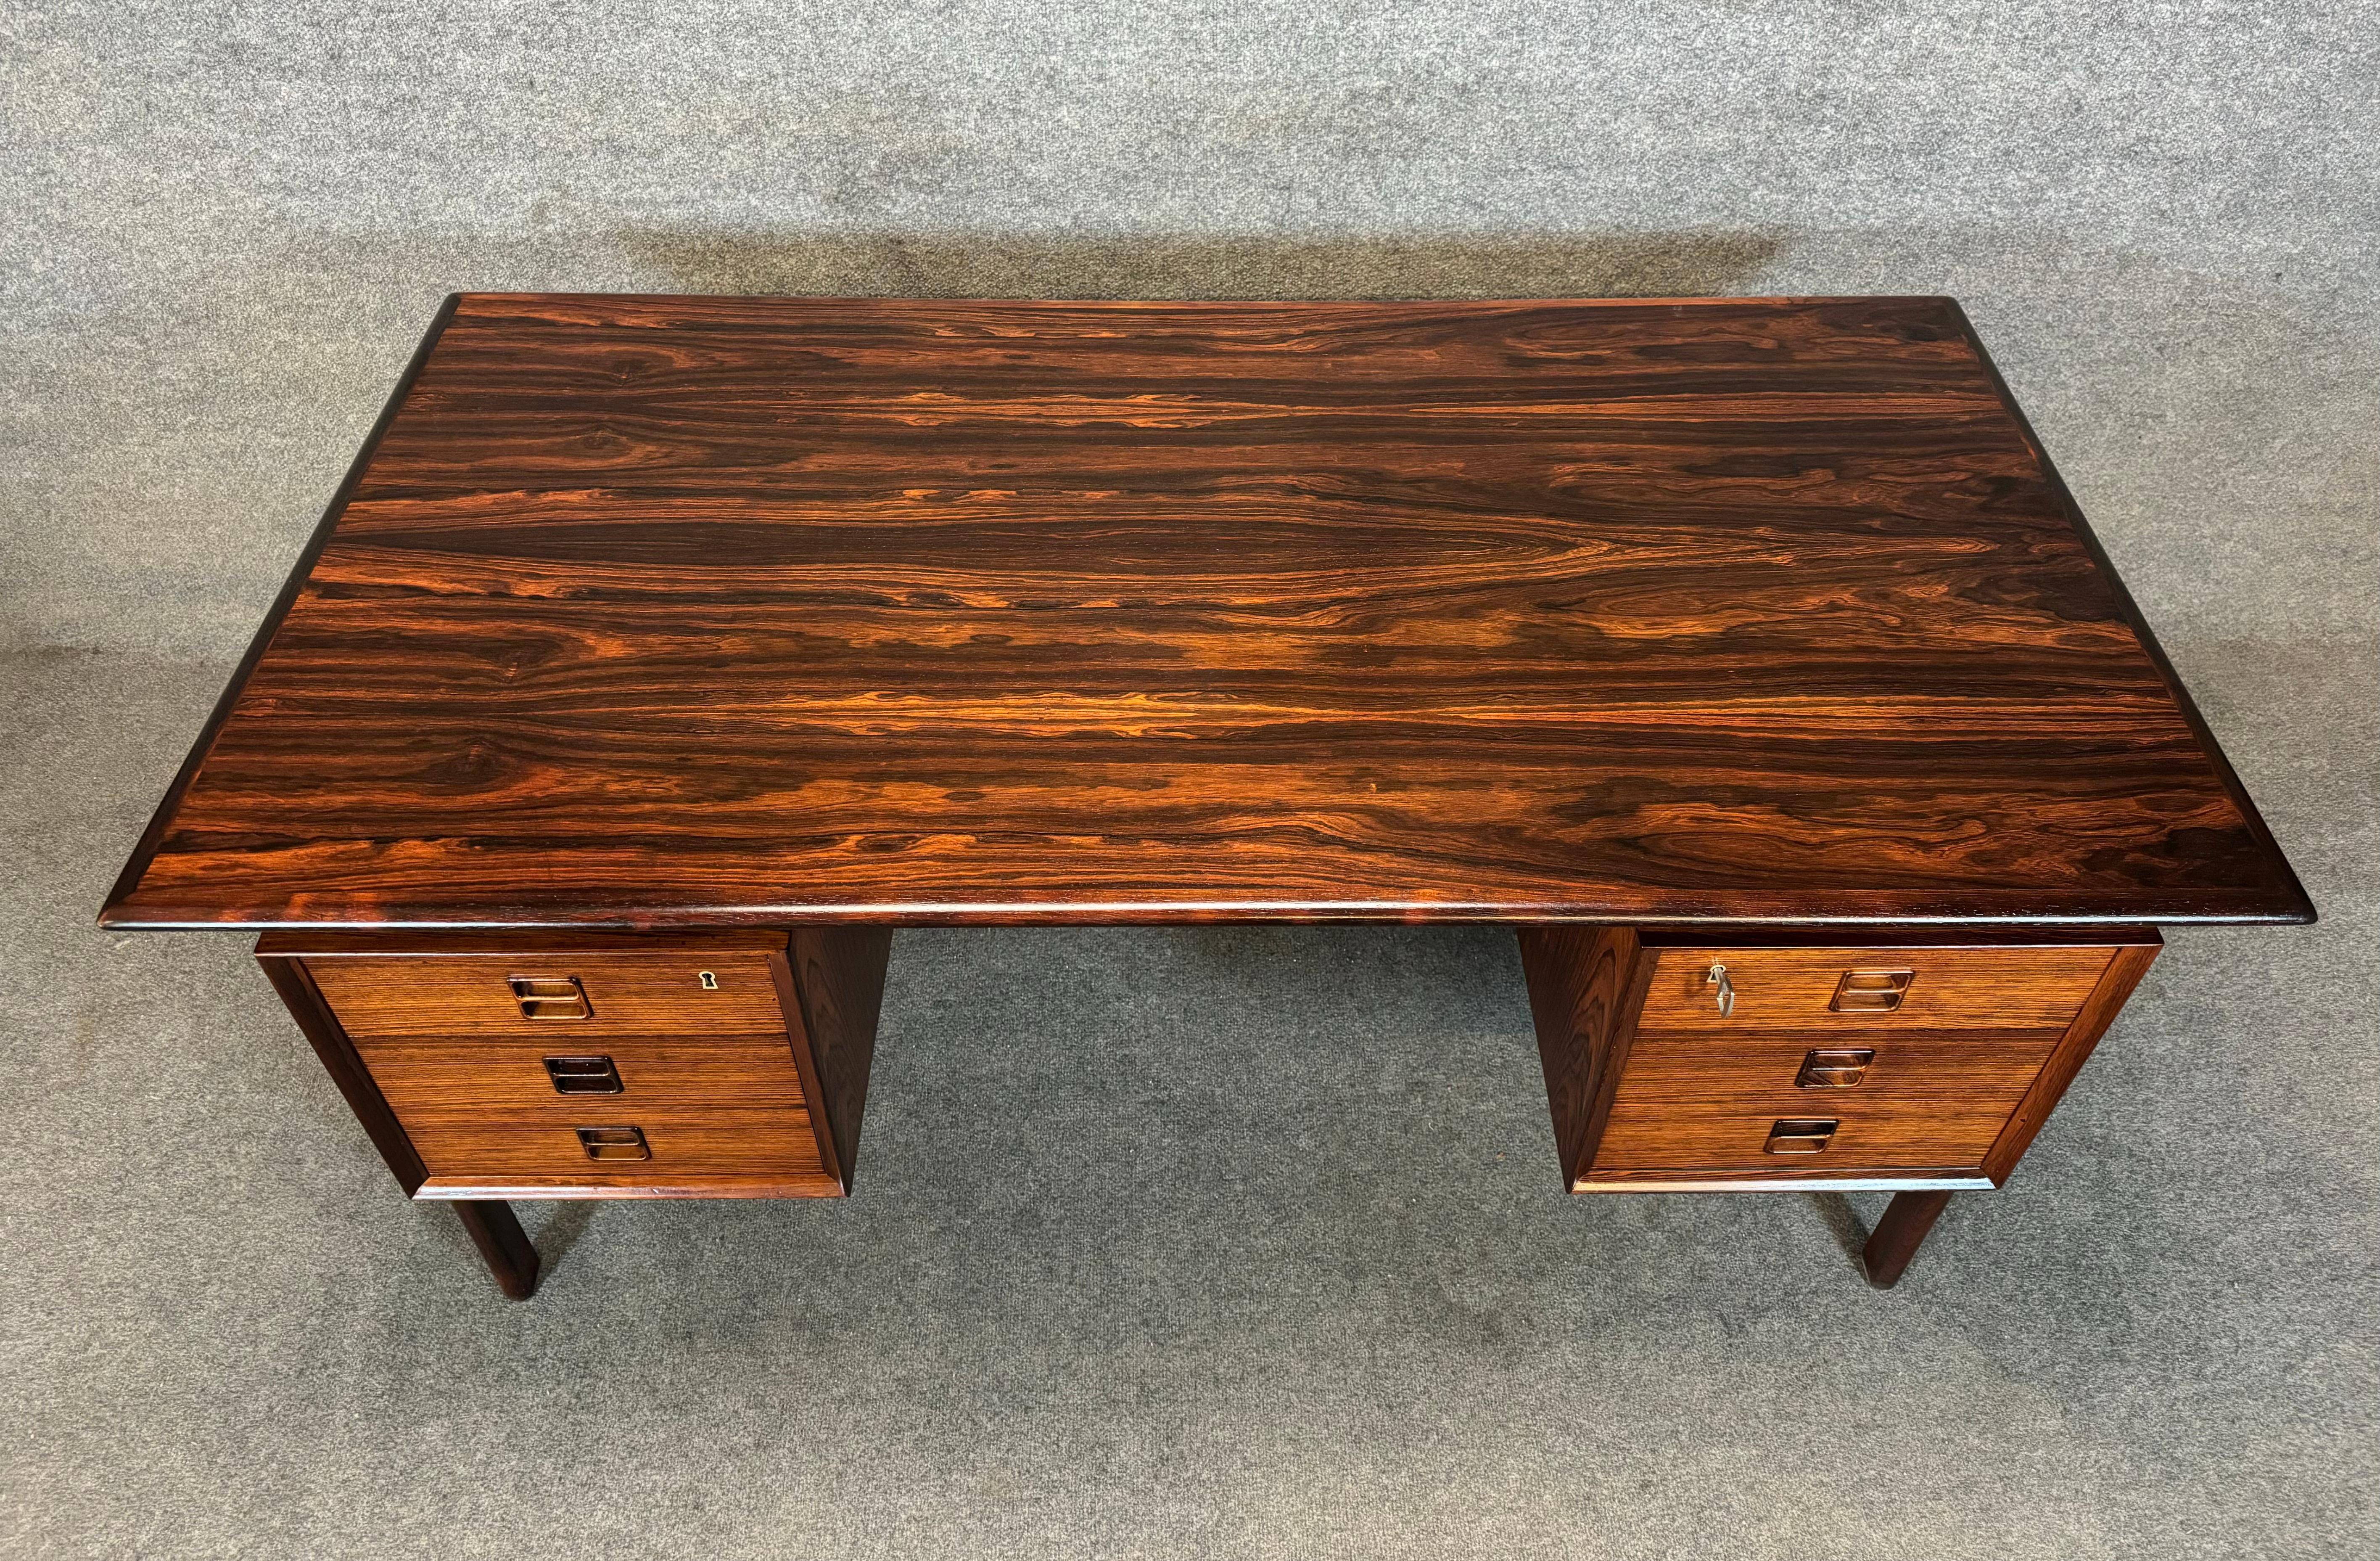 Here is a beautiful scandinavian modern rosewood desk by Gunnar Falsig Mobelfabrik, Denmark, 1960's.
This exquisite desk, recently imported from Denmark to California before its restoration, features vibrant wood grain details, a sculpted frame-legs